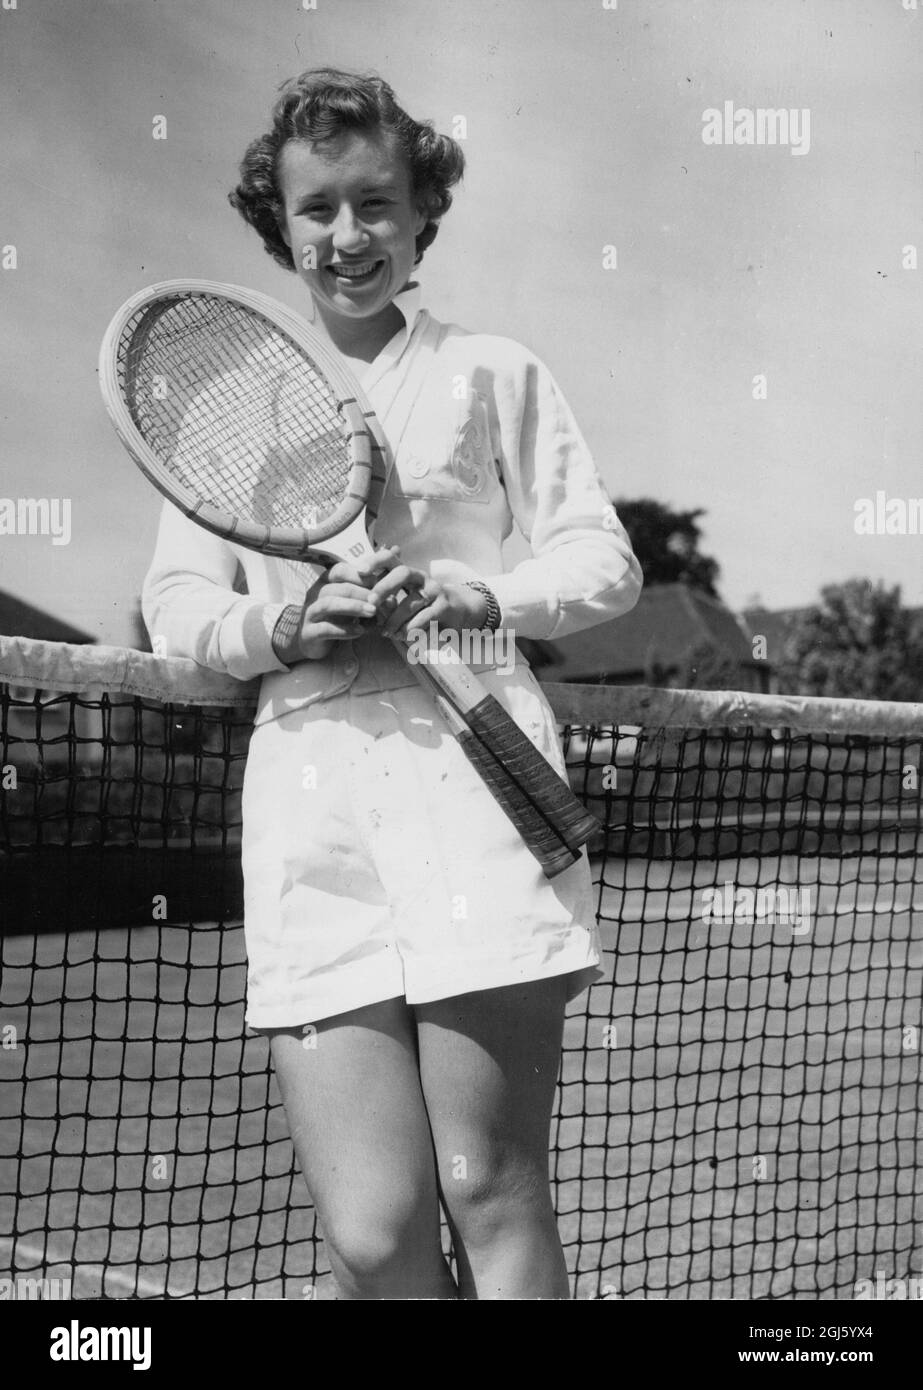 Maureen Connolly : 1934-1969 , American tennis player , Little Mo as she was known , seen as she practices at the Surbiton Club , Surrey , England 21 May 1952 Stock Photo